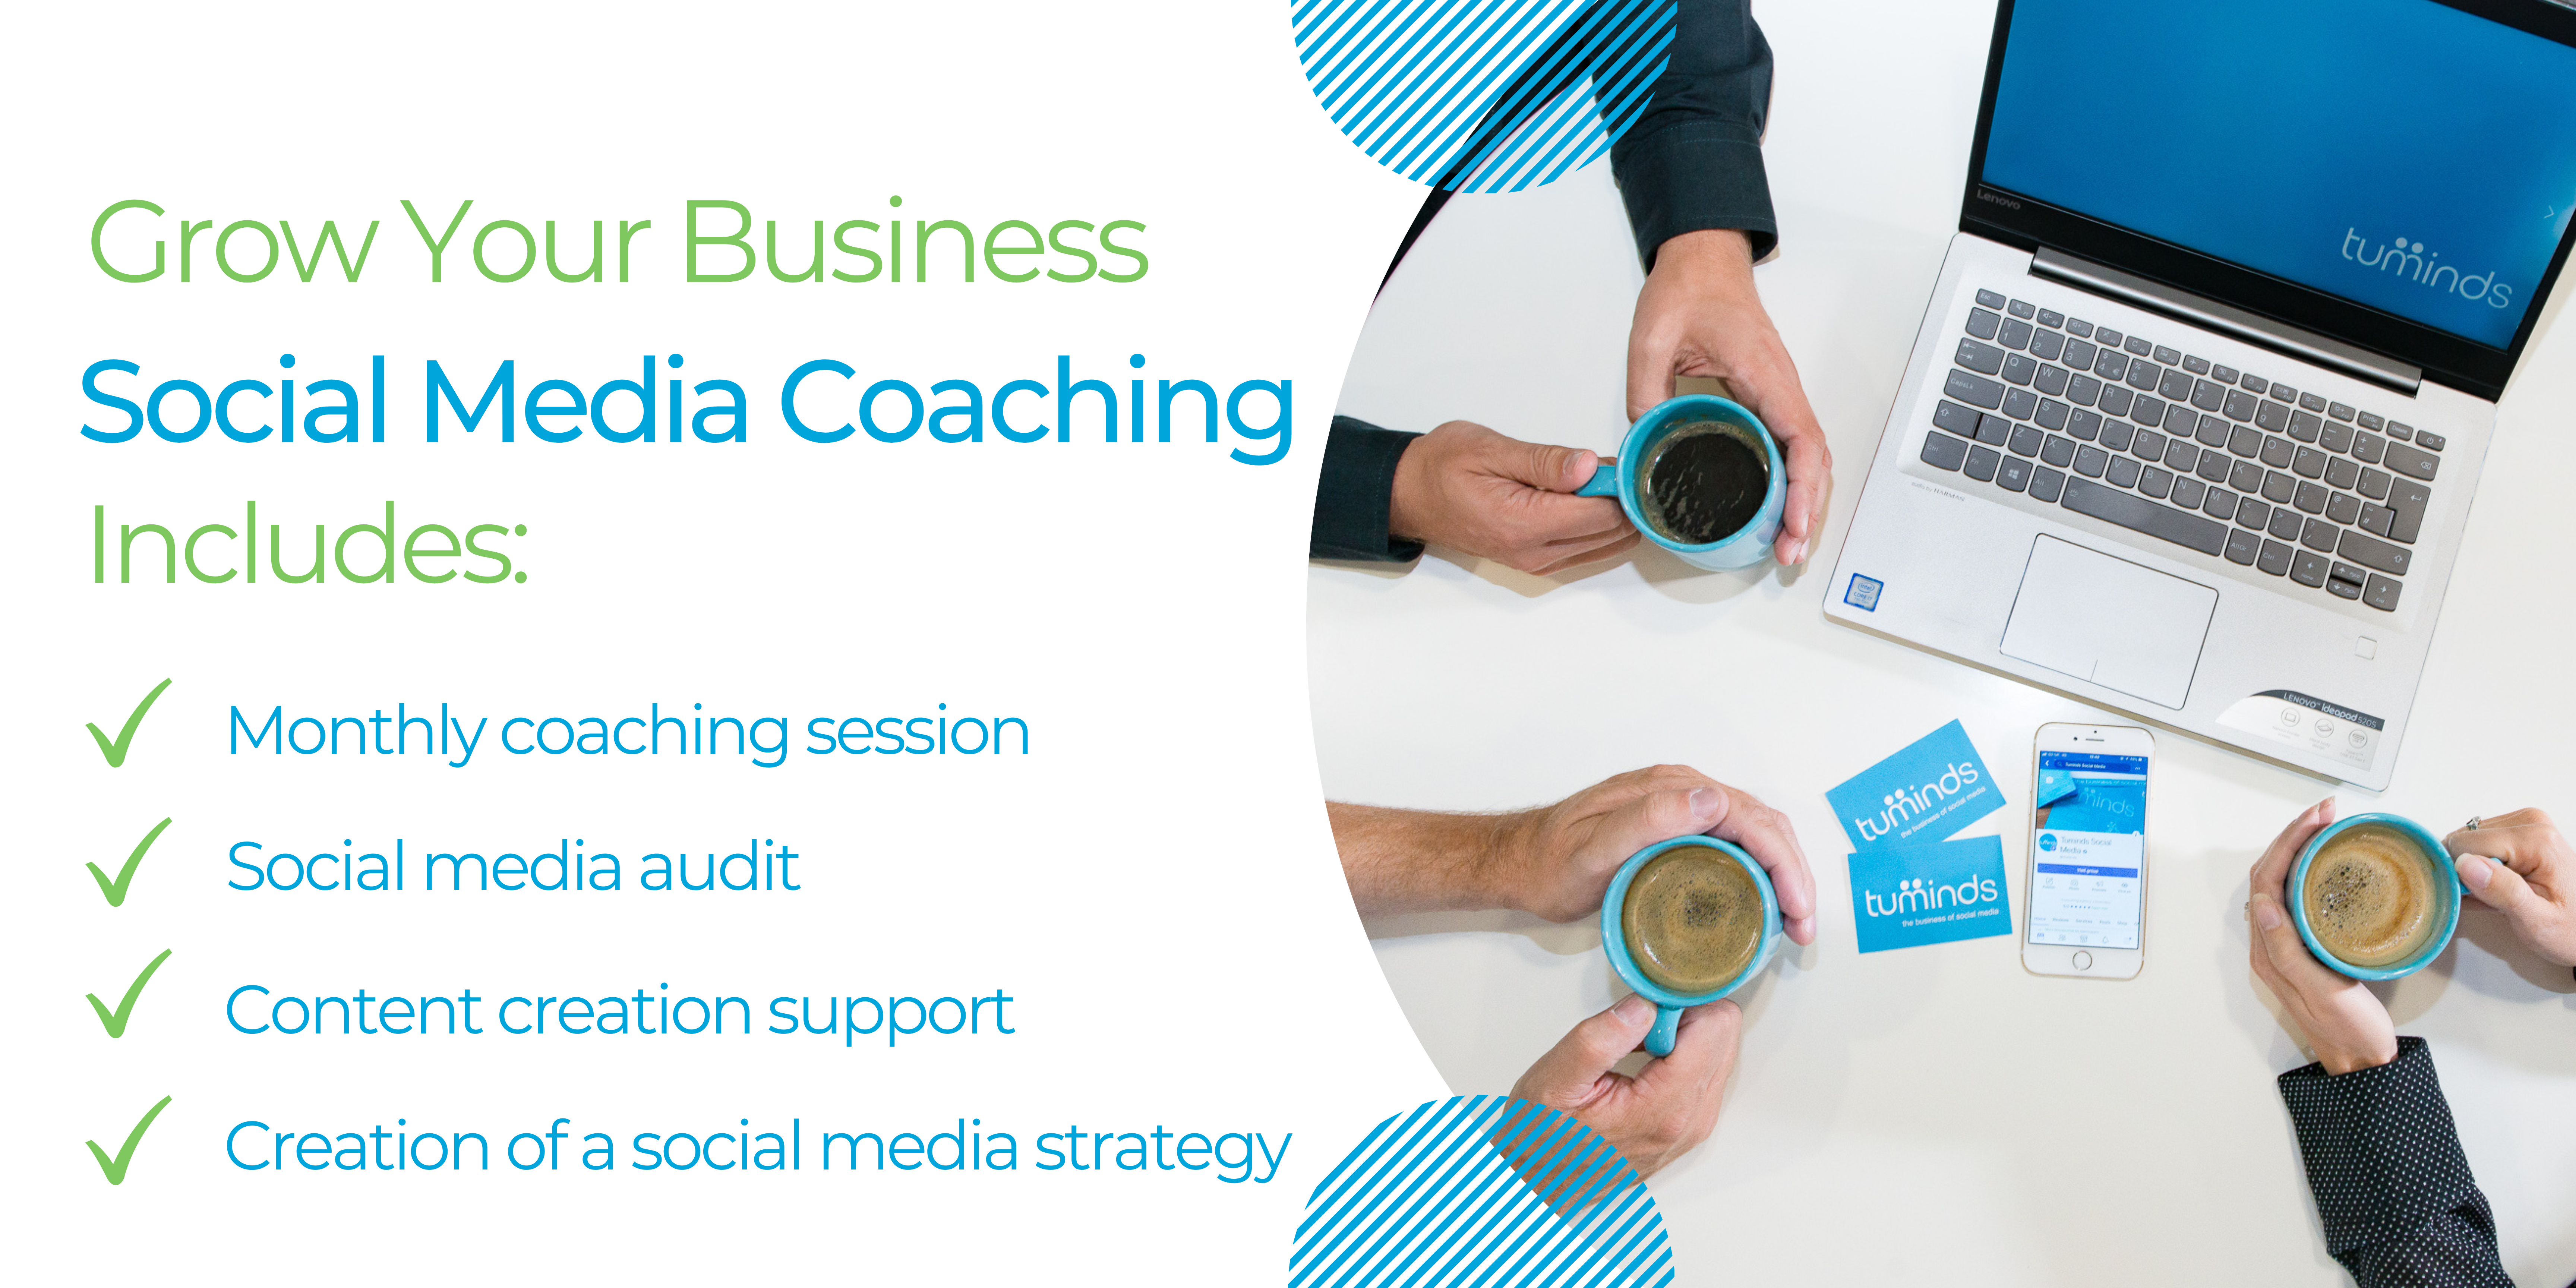 Social media coaching plan for small business owners